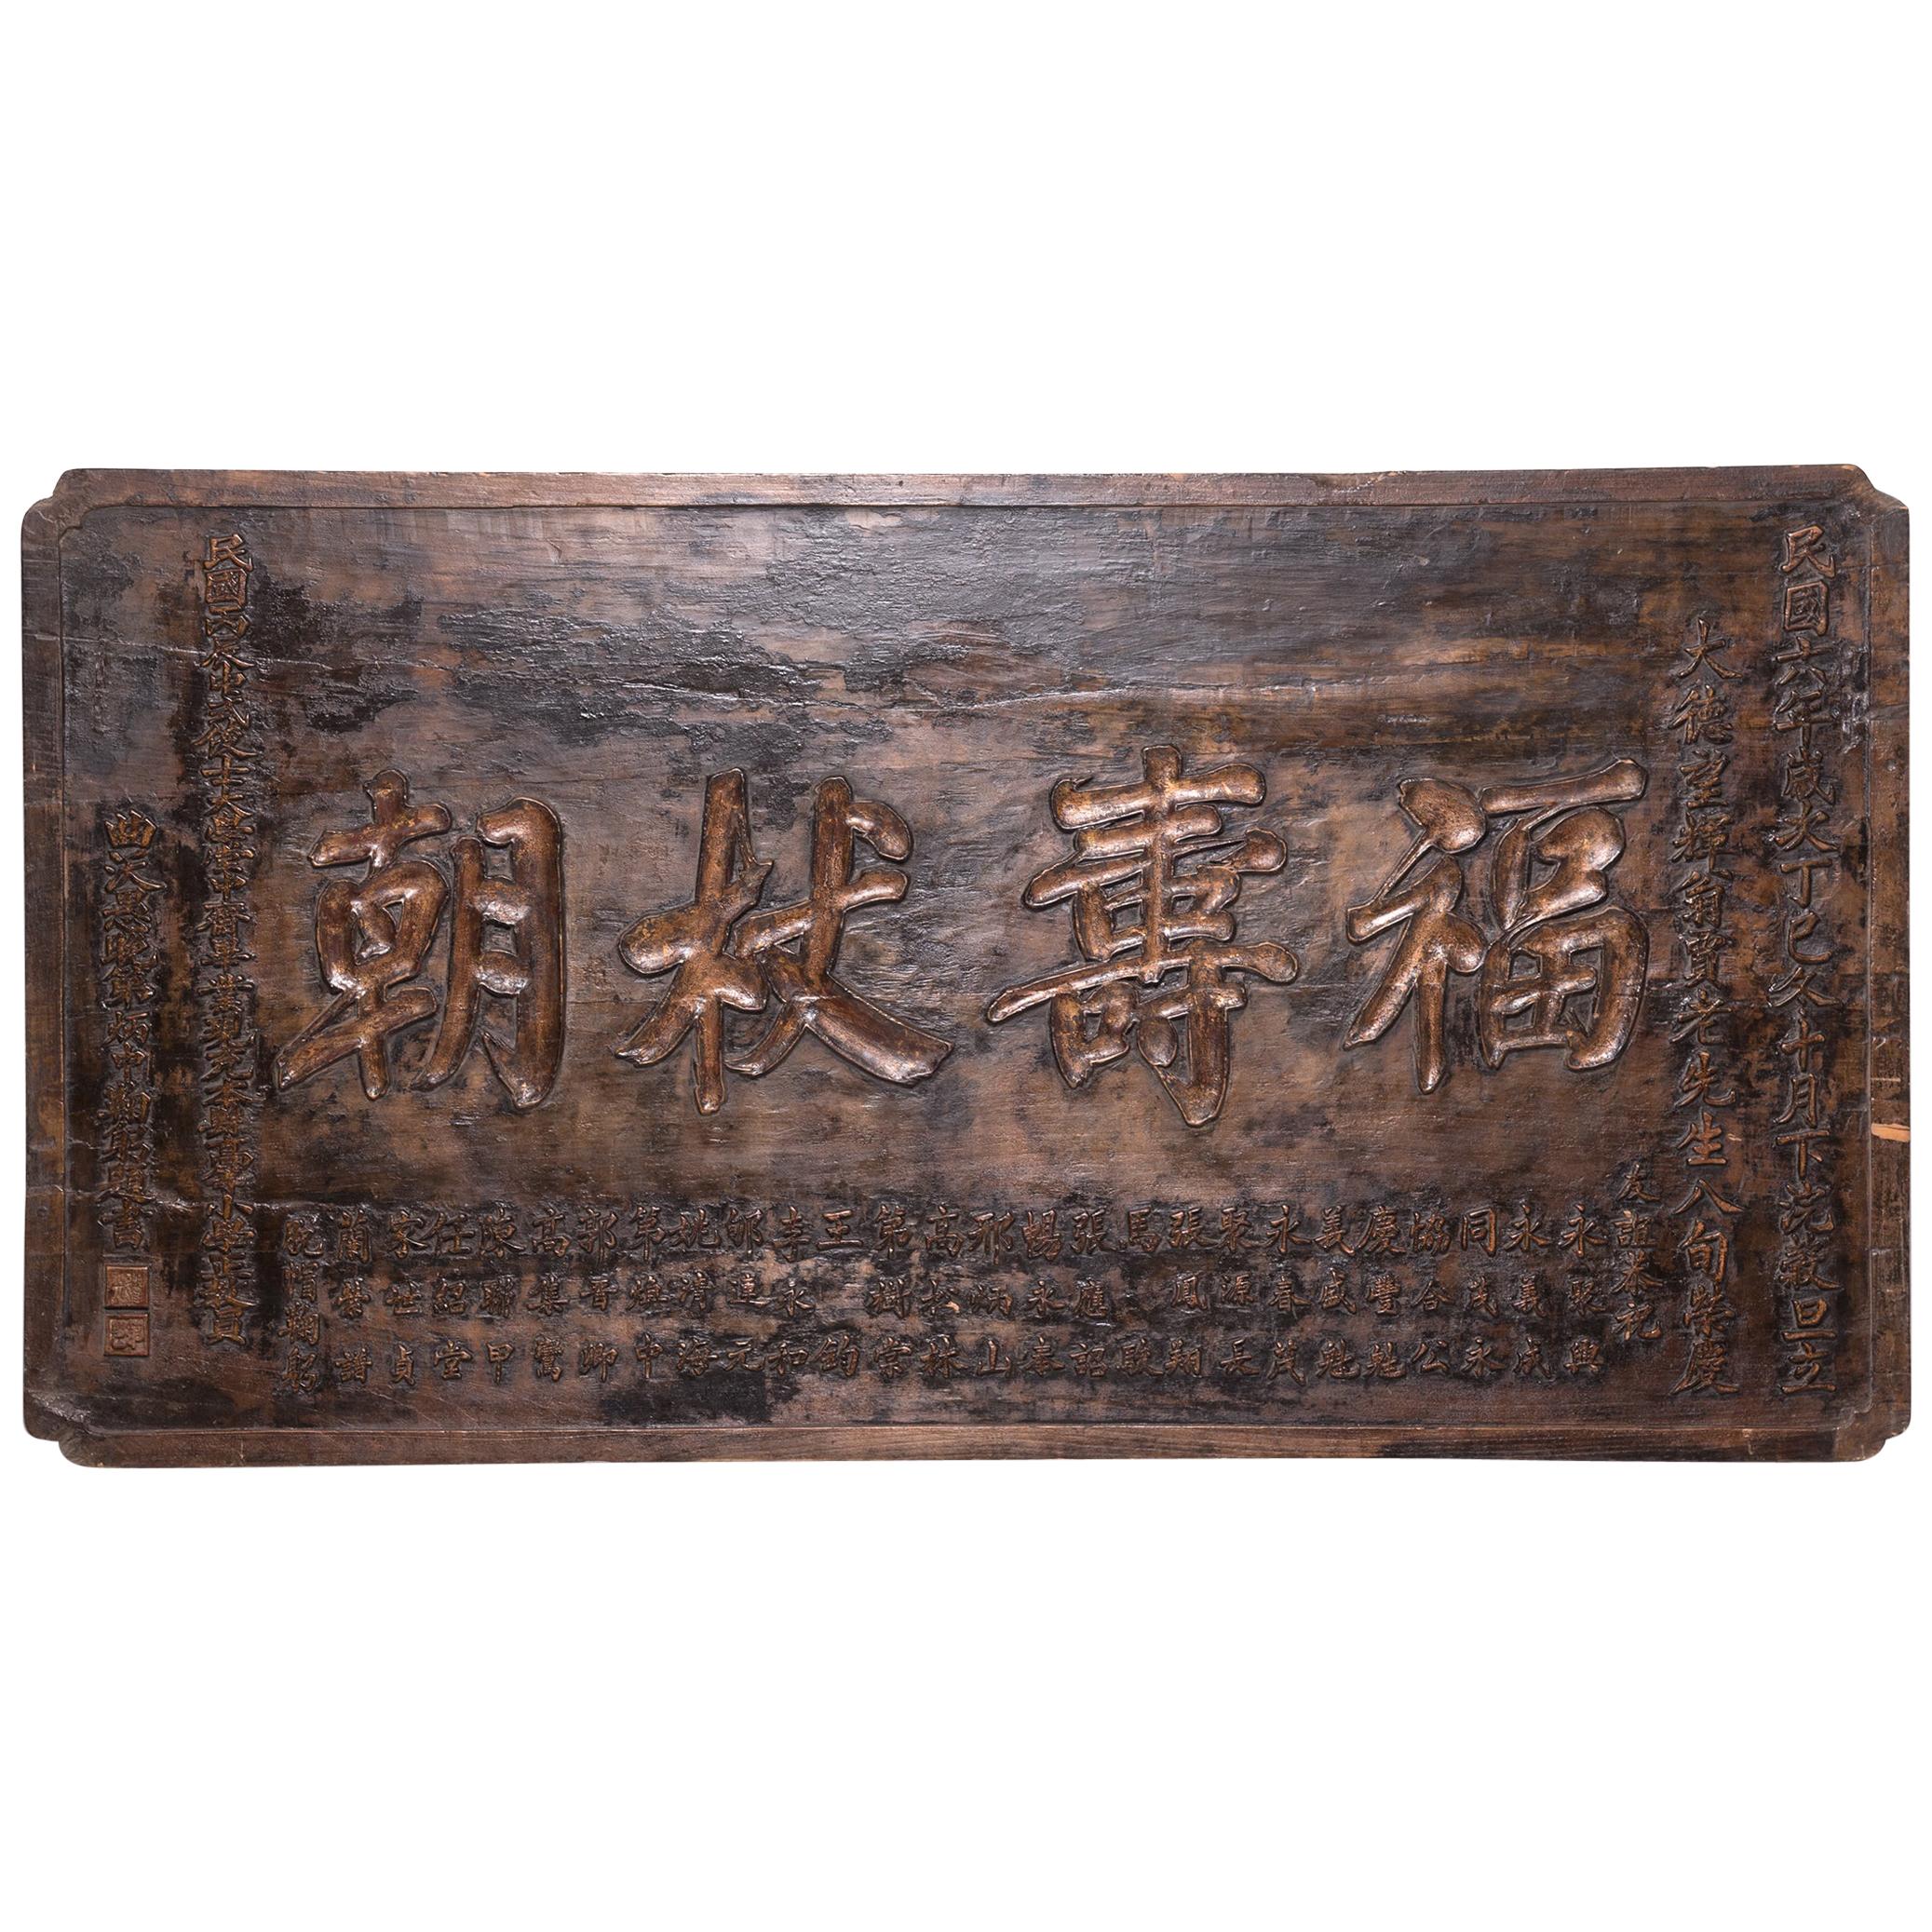 Chinese Sign of Honor, c. 1850